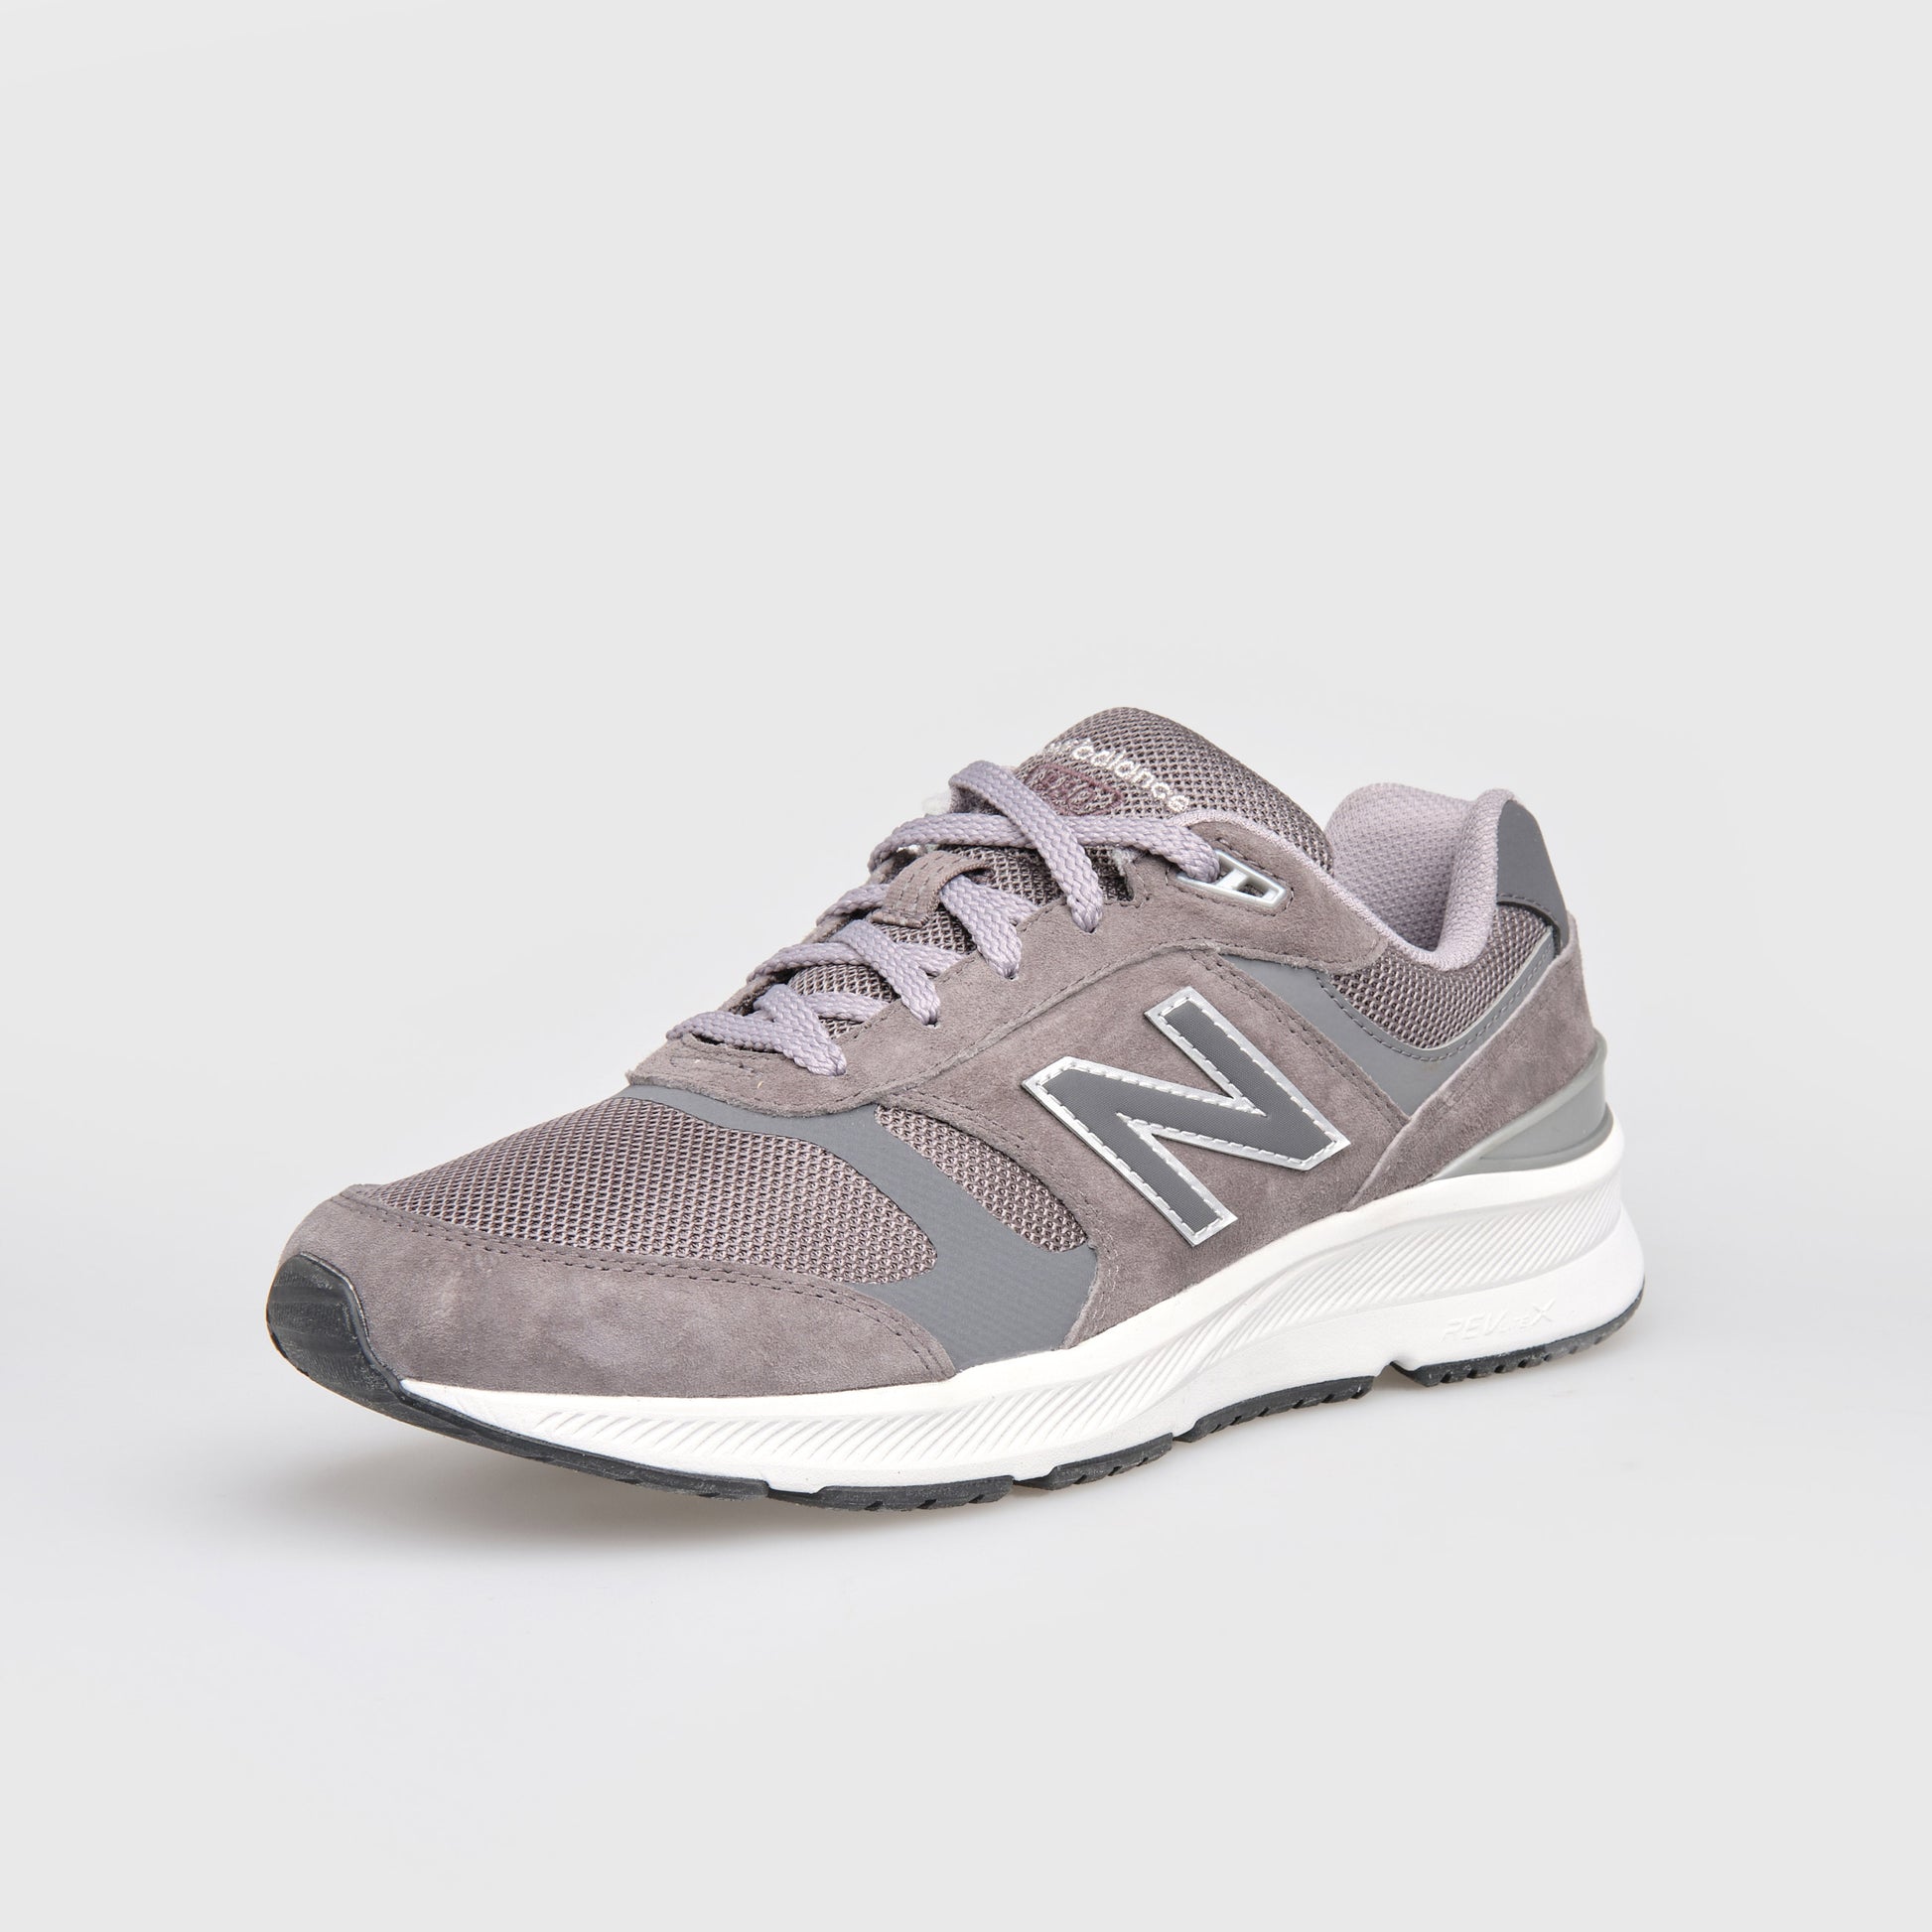 New Sneakers 880 V5 - MW880GR5 - Men's Collection – REPOKER®